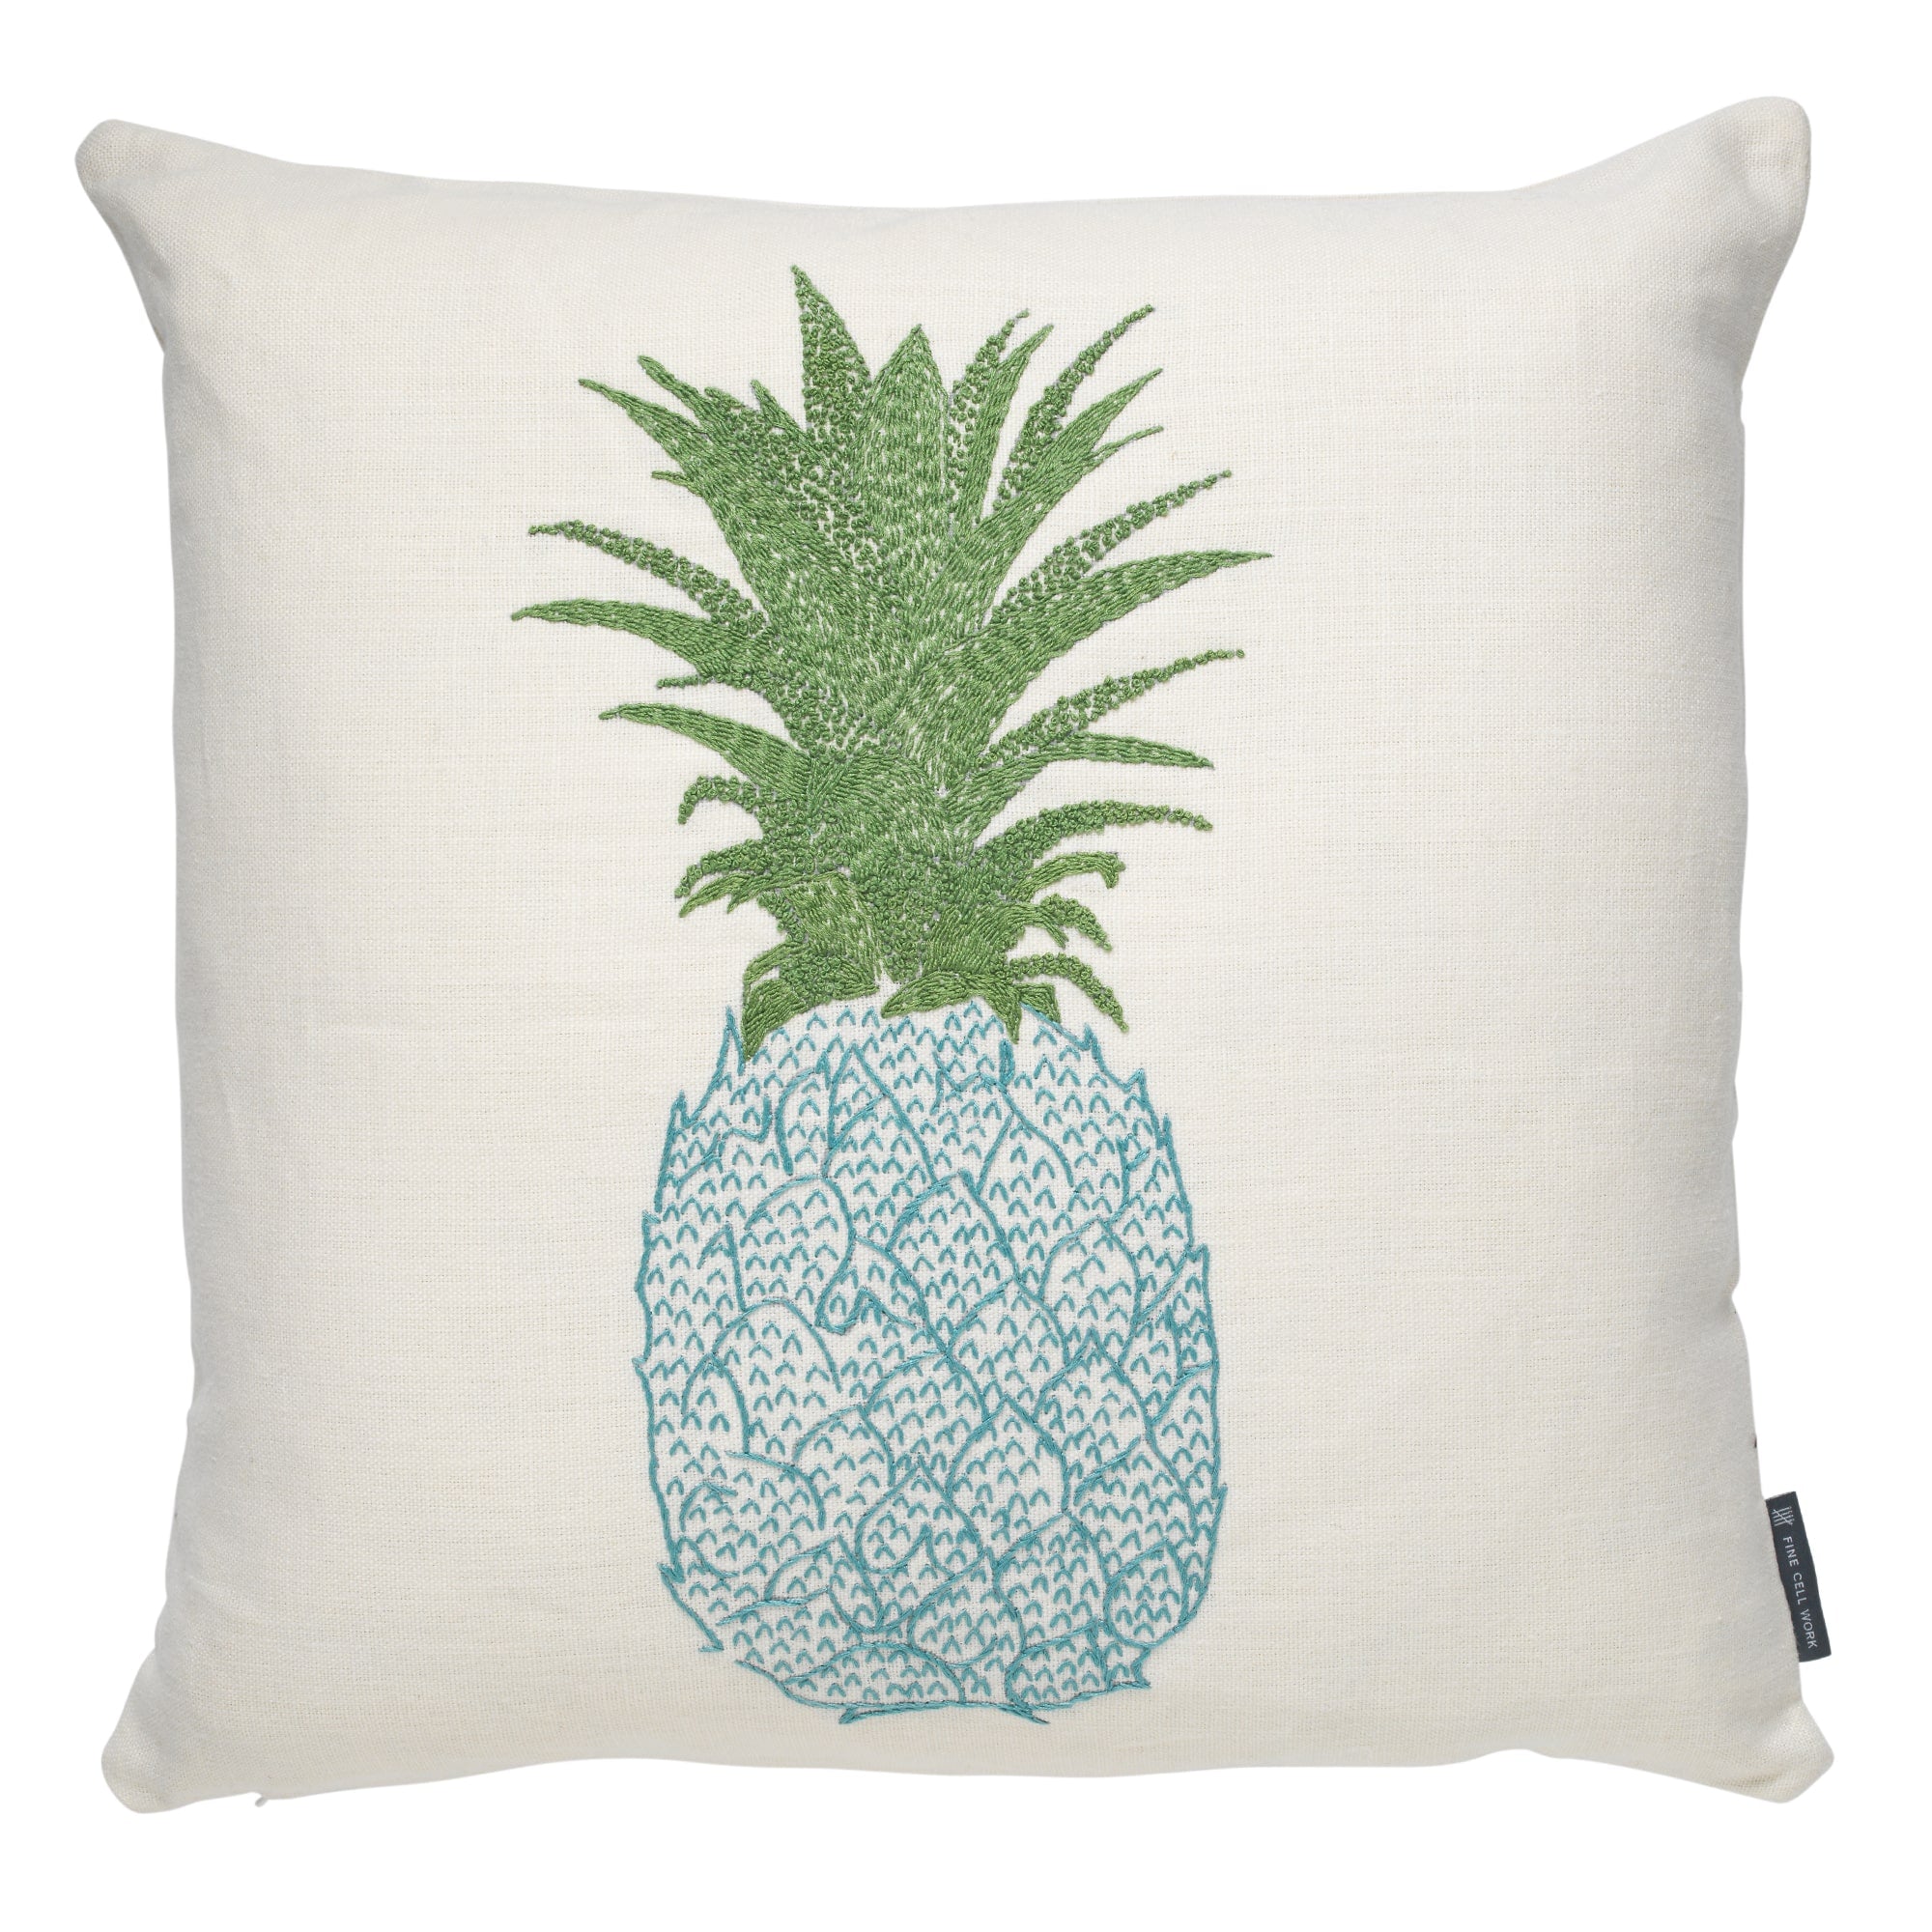 Pineapple Embroidered Cushion Blue and Green on Cream